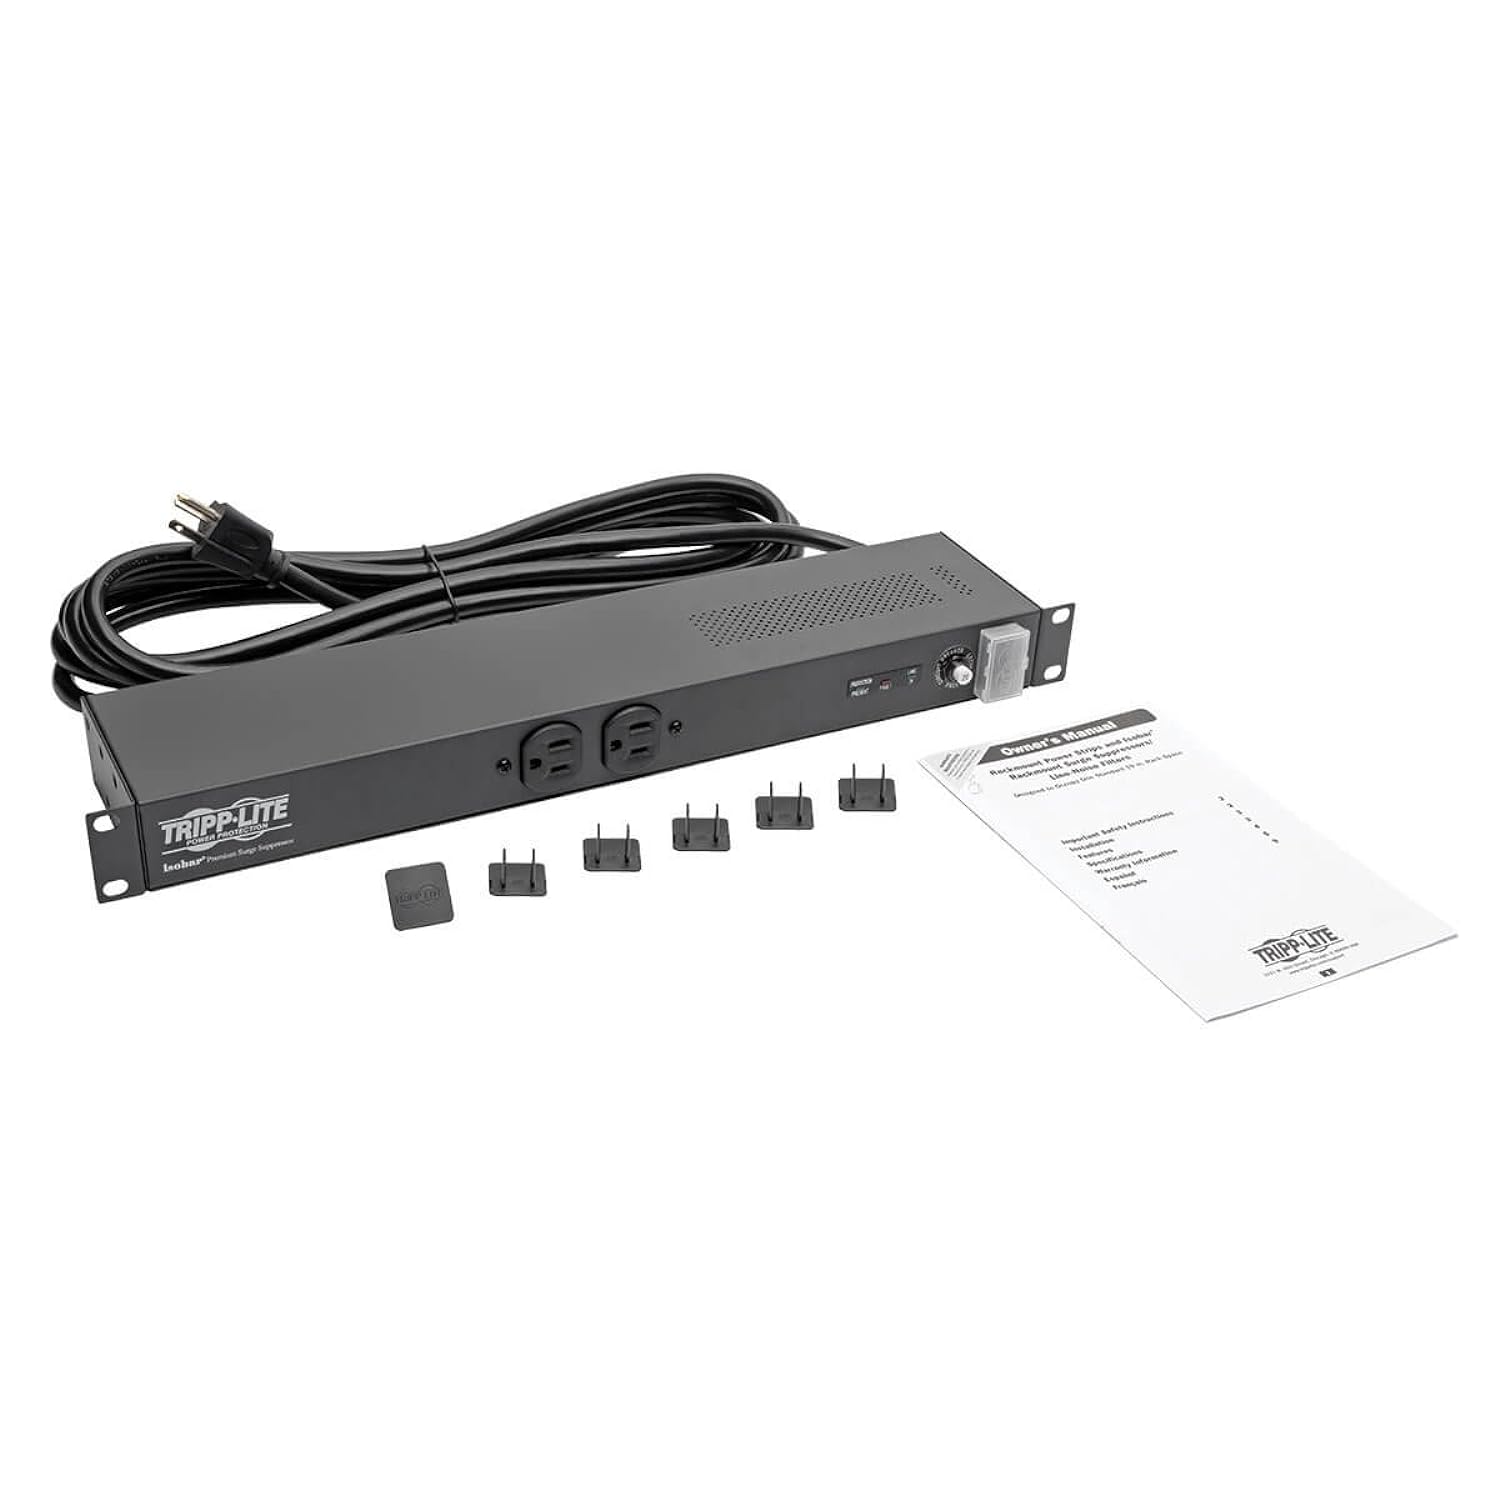 Tripp Lite Isobar 12-Outlet Network Server Surge Protector, 15 ft. Cord w/5-20P Plug, 3840 Joules, 1U Rack-Mount, Metal, & $2…